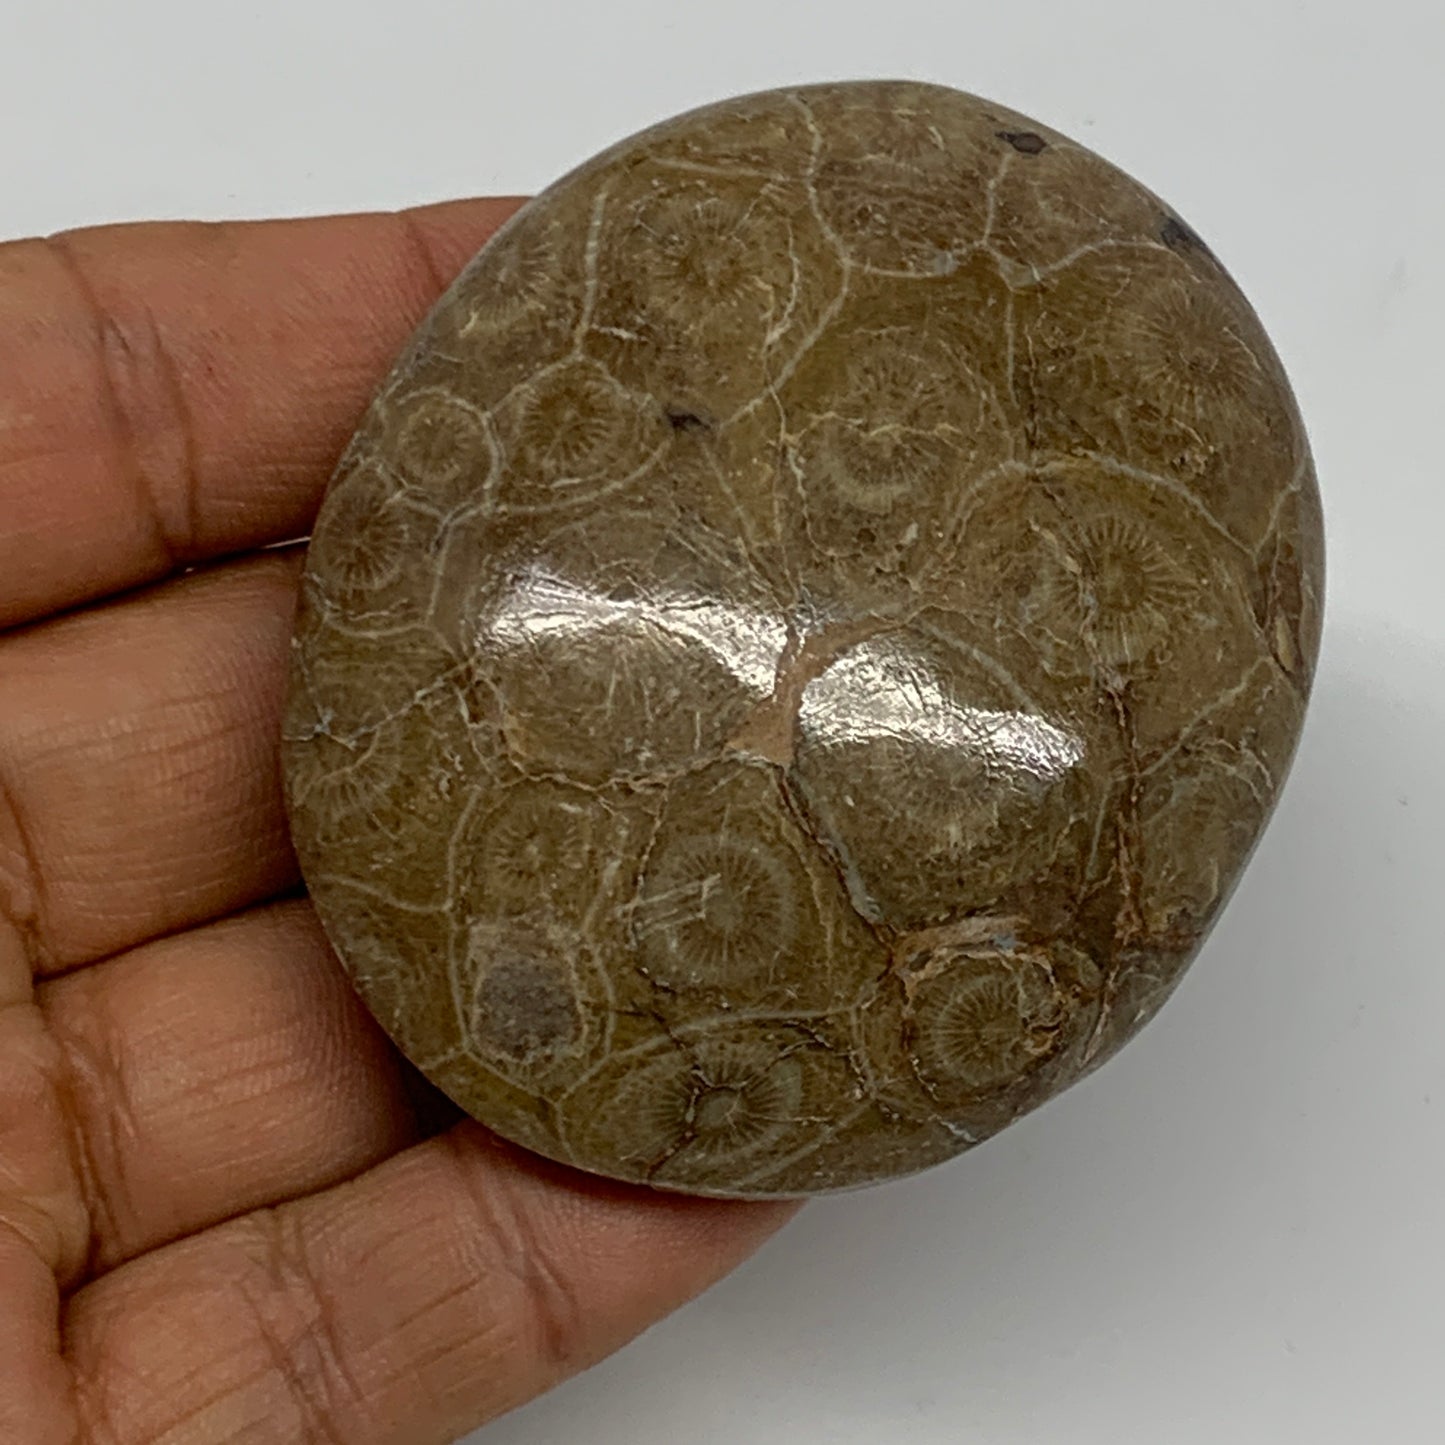 106.1g,2.5"x2.1"x 0.9", Coral Fossils Palm-Stone Polished from Morocco, B20335